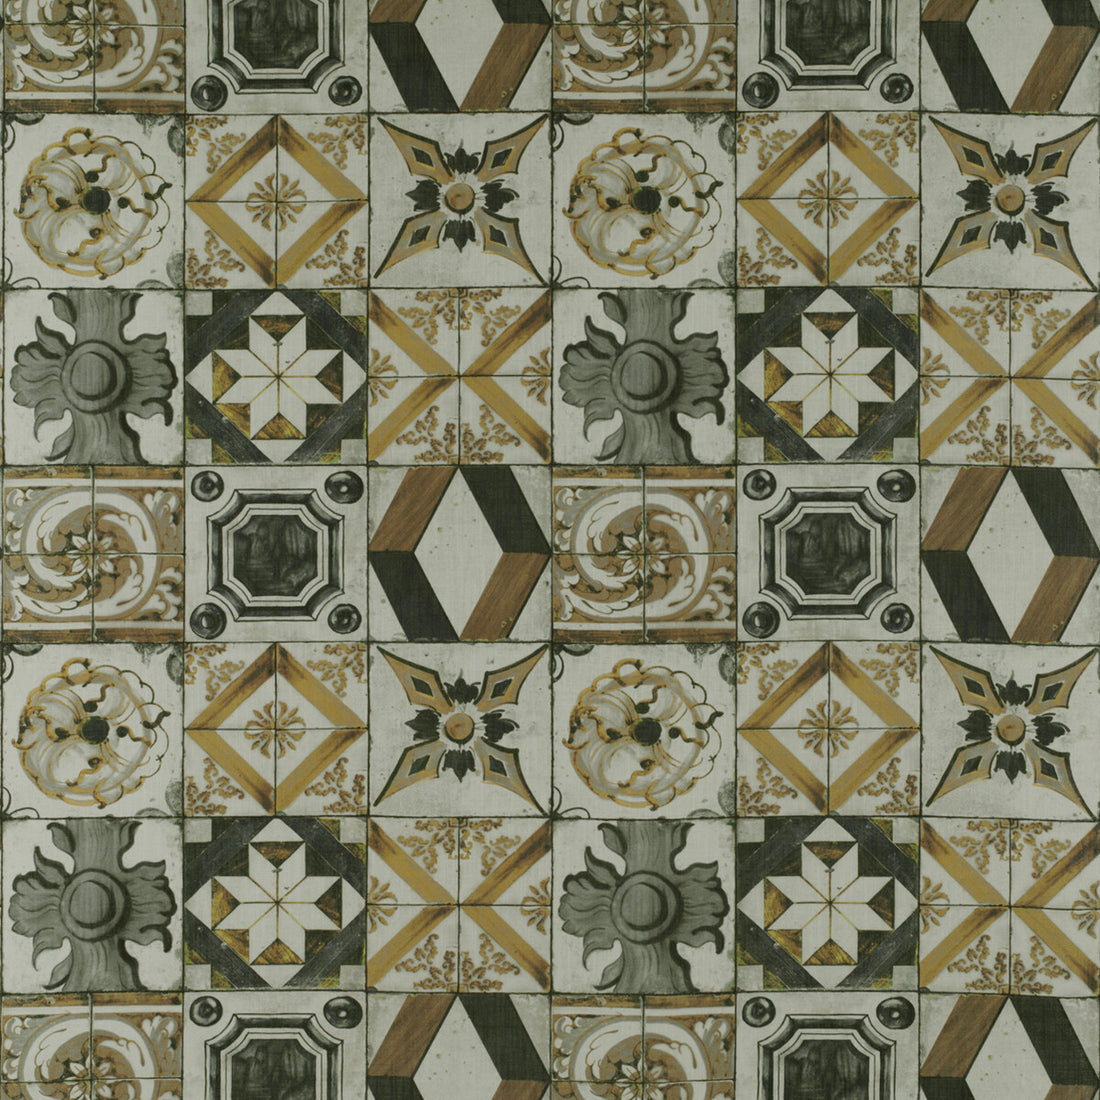 Trastevere fabric in oro/gris color - pattern GDT5332.005.0 - by Gaston y Daniela in the Tierras collection